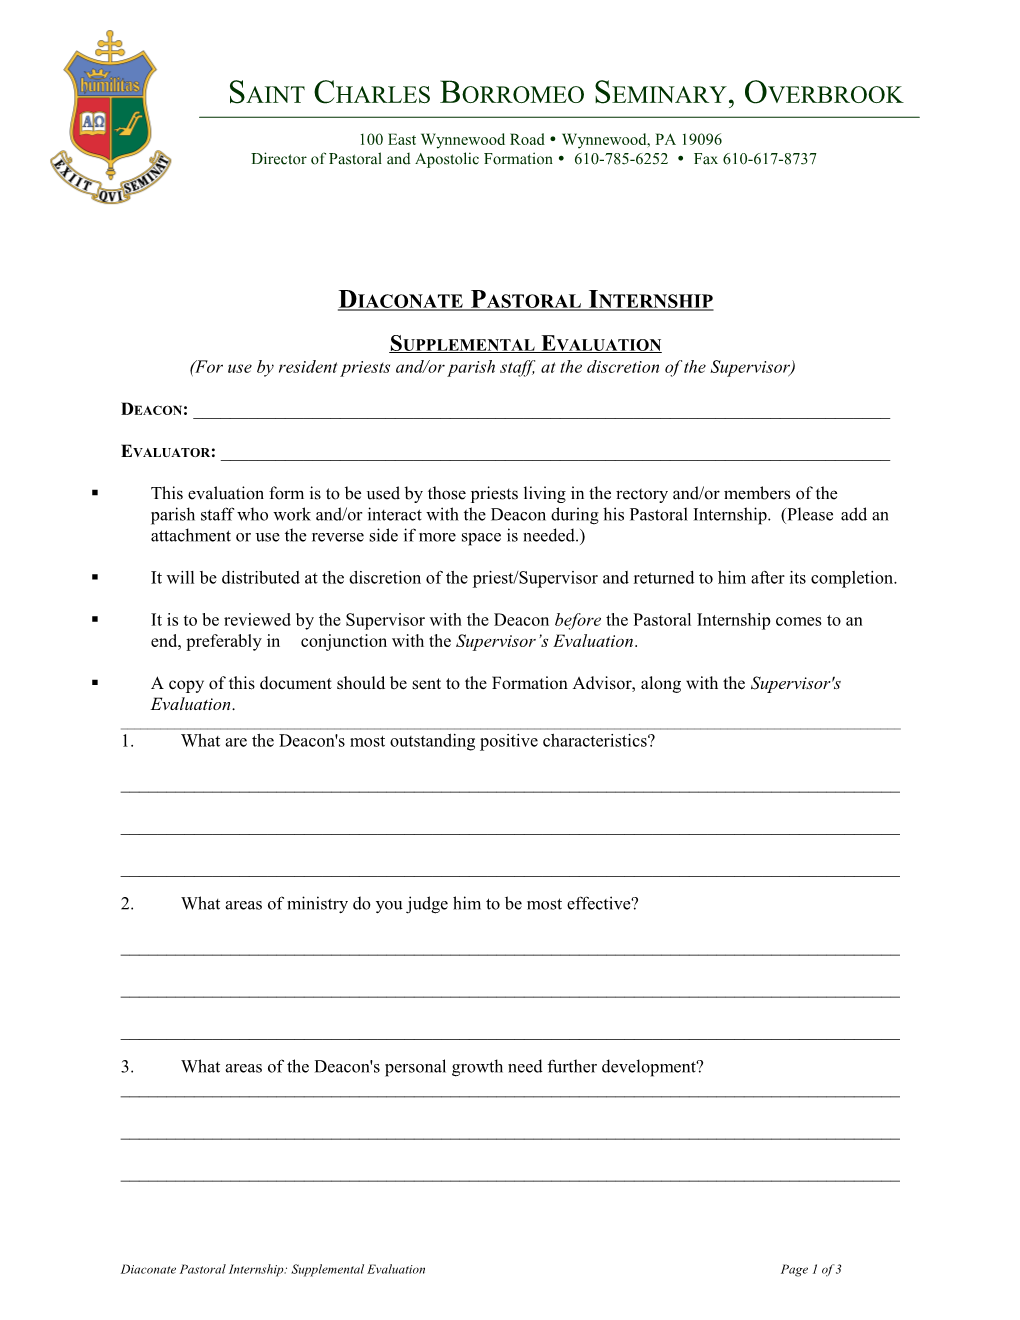 Homily Evaluation Form